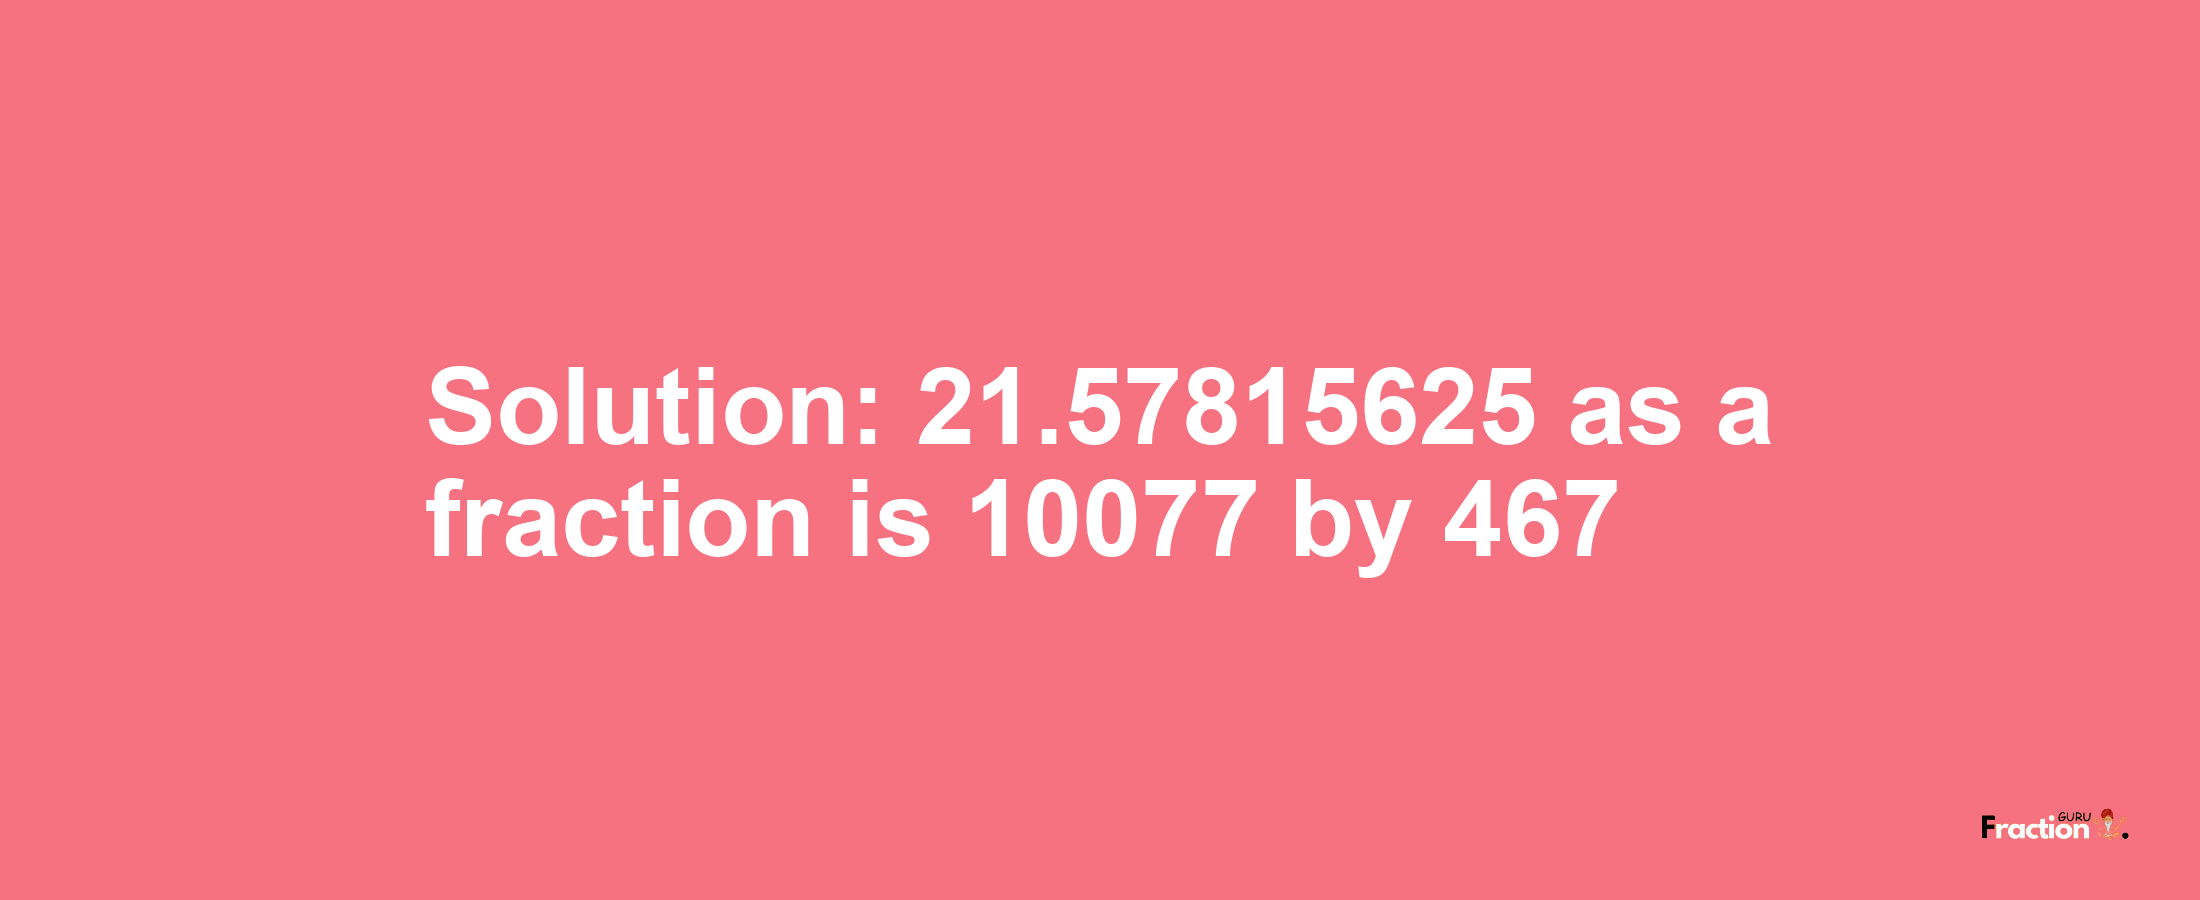 Solution:21.57815625 as a fraction is 10077/467